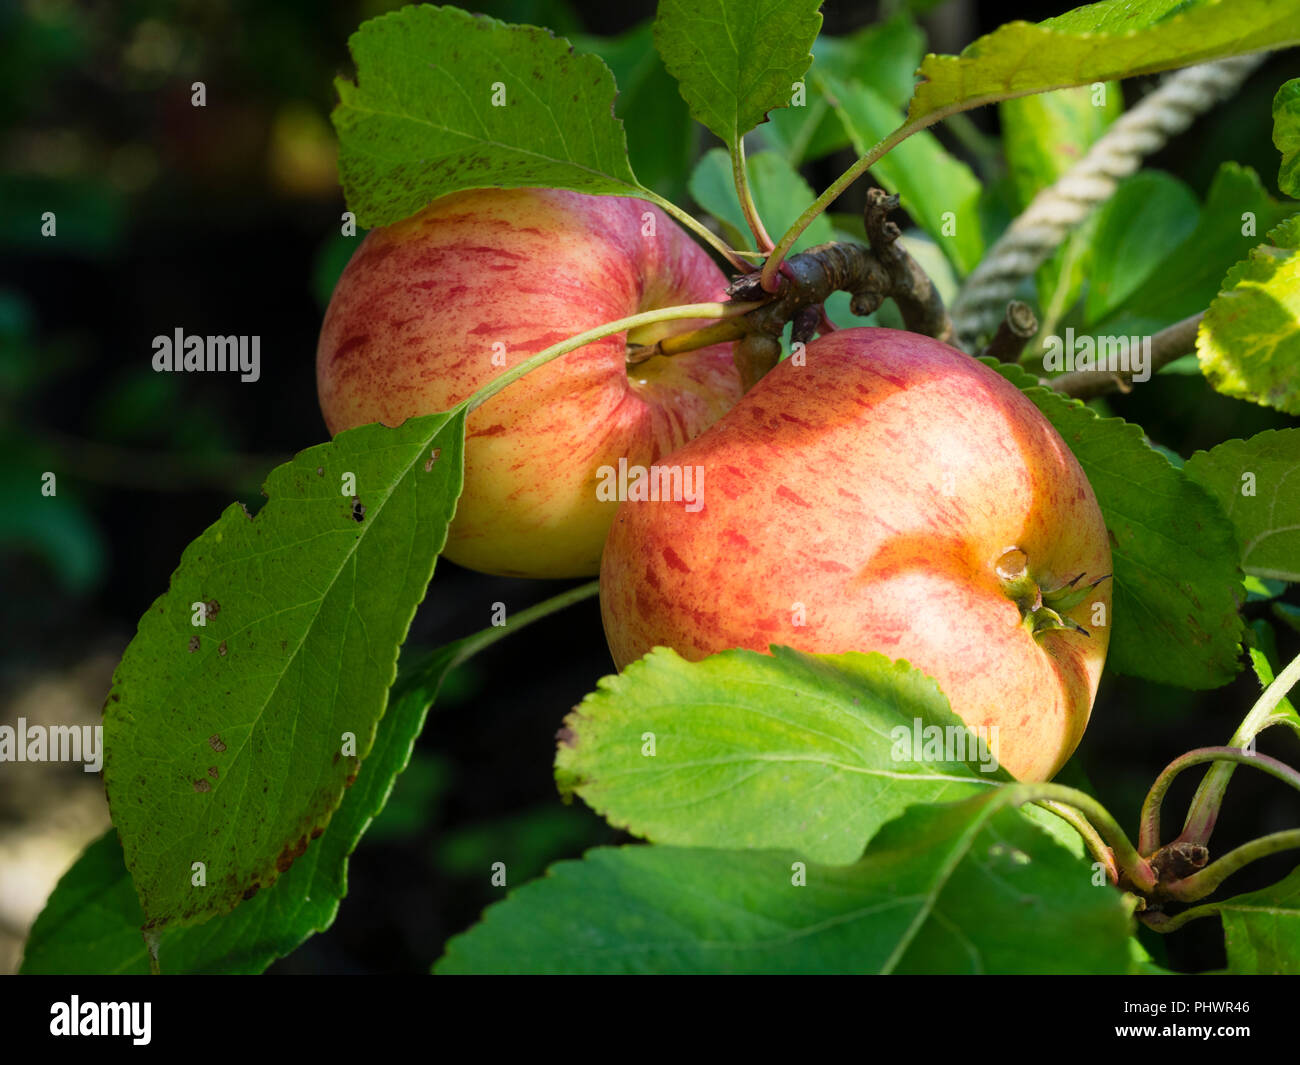 Red blotched ripe fruit of the cooking and dessert apple, Malus domestica 'James Grieve' Stock Photo